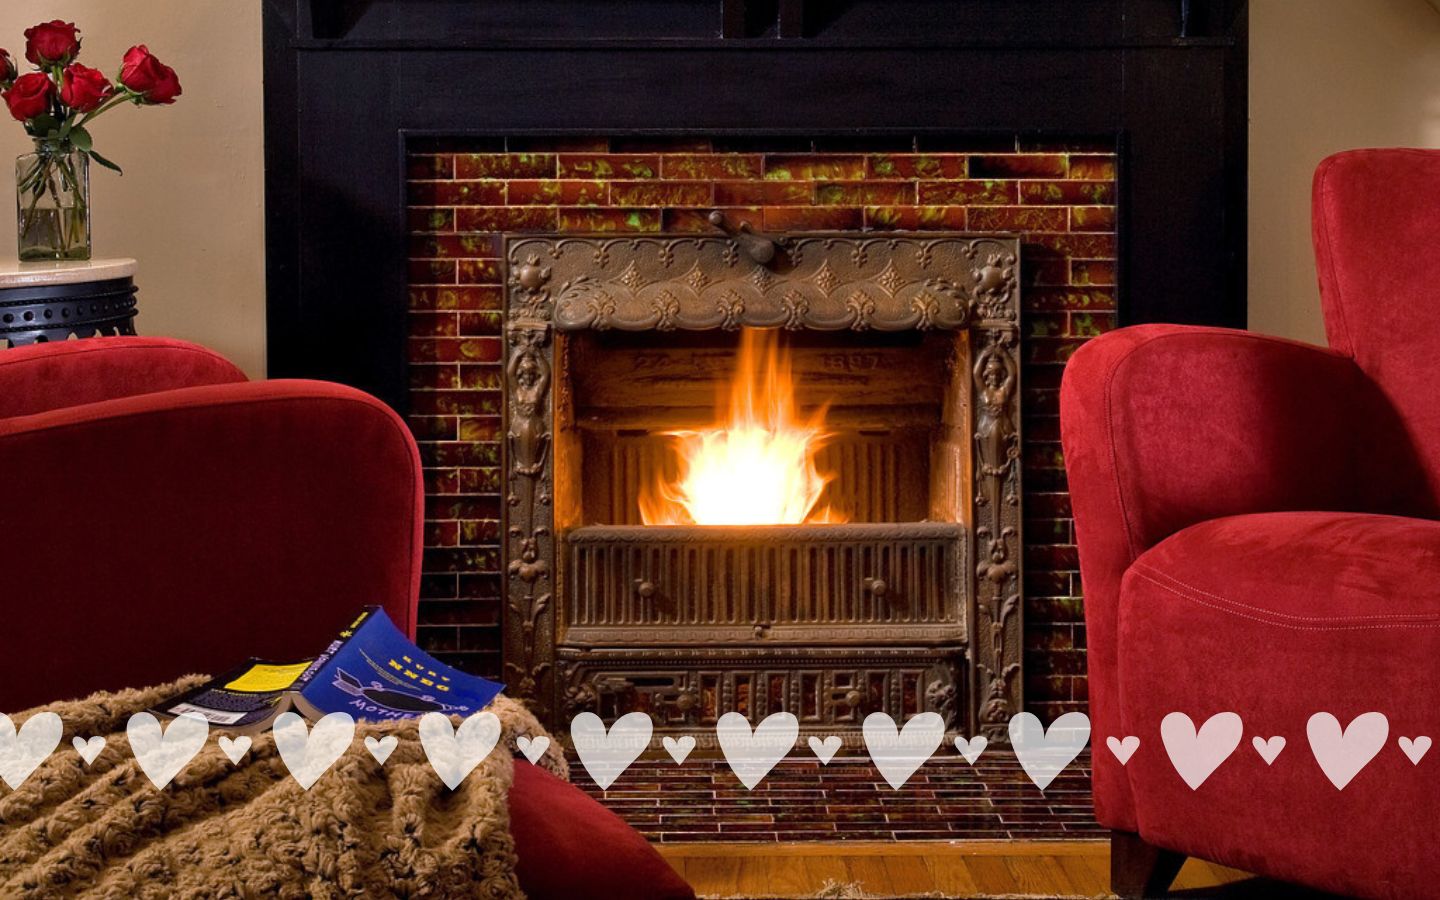 The Crowning Suite at Castle in the Country with a wood-burning fireplace, two red armchairs, and a vase of roses in the corner. Heart stickers across the bottom of the photo.